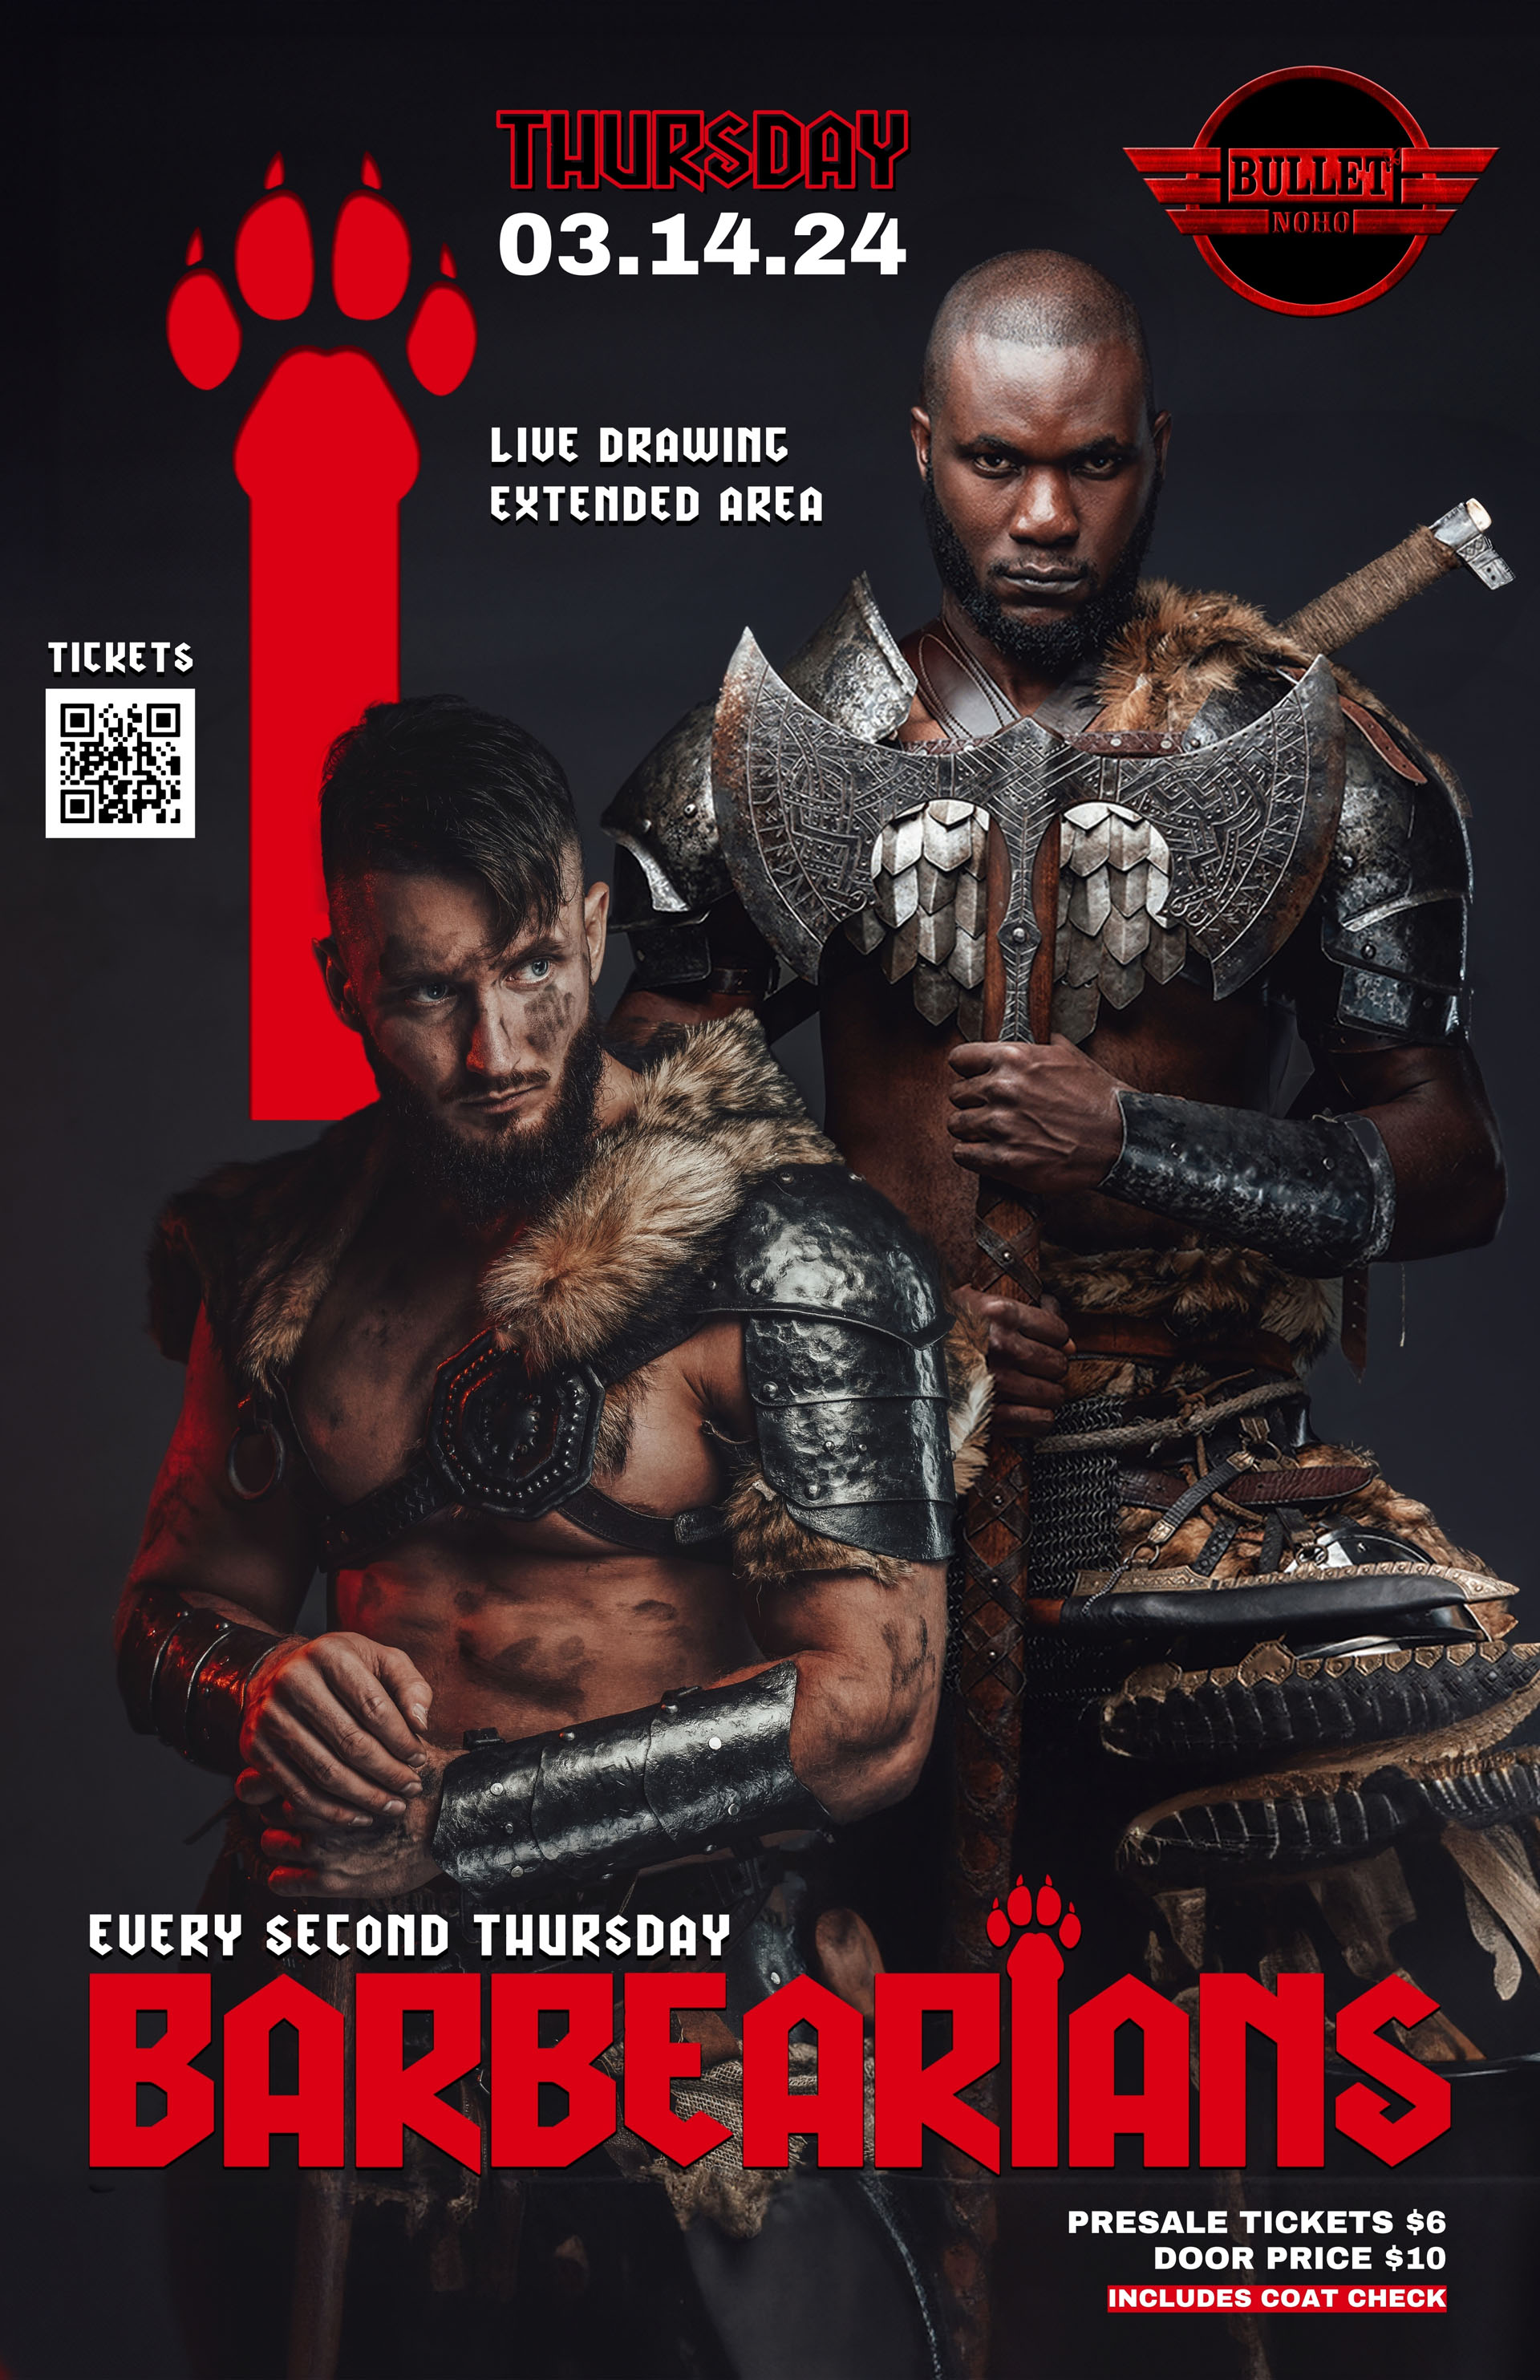 THE BULLET BAR Presents BARBEARIANS: A BEAR & LEATHER EVENT: Thursday, 03/14/24 at 9:00 PM. Presale Tickets $6 and Door Cover $10. Presales: https://www.eventbrite.com/e/barbearians-the-bullet-noho-tickets-820610436907?aff=bulletbar